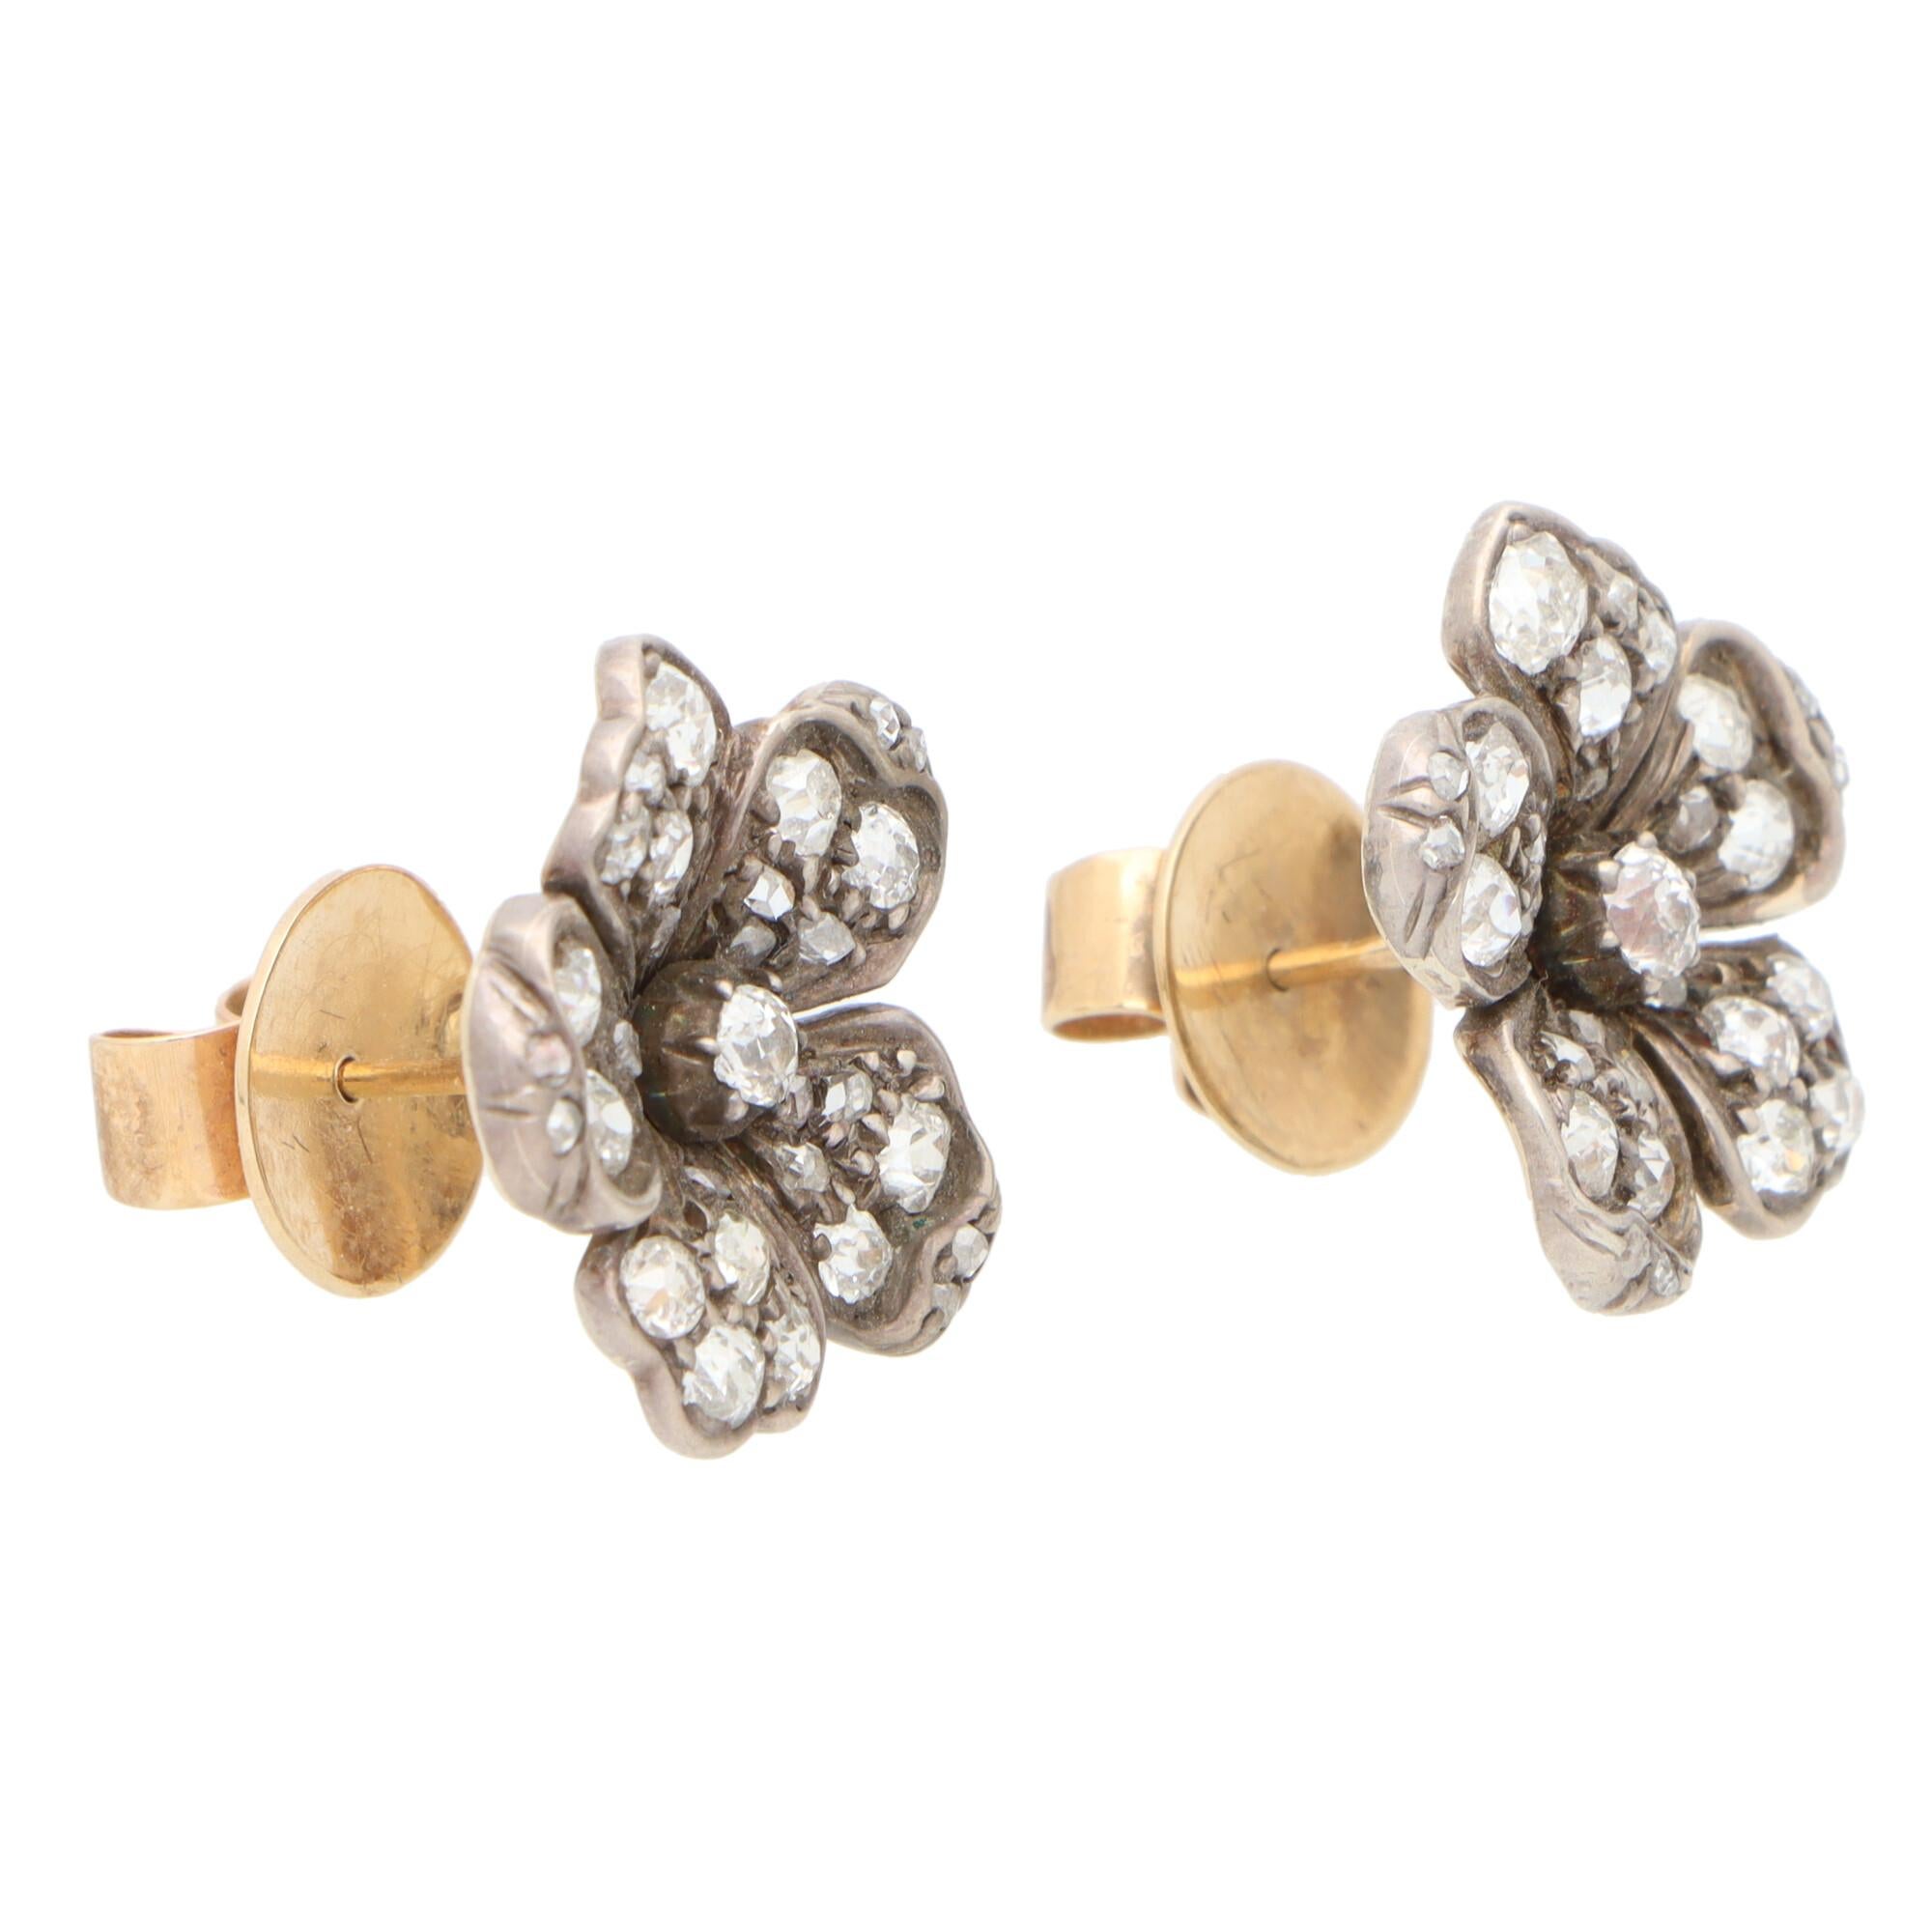 A truly beautiful pair of Victorian diamond floral cluster earrings set in silver on gold.

Set in the iconic Victorian silver on gold setting; each earring depicts a delicate looking floral motif and are set with a mixture of rose and old mine cut